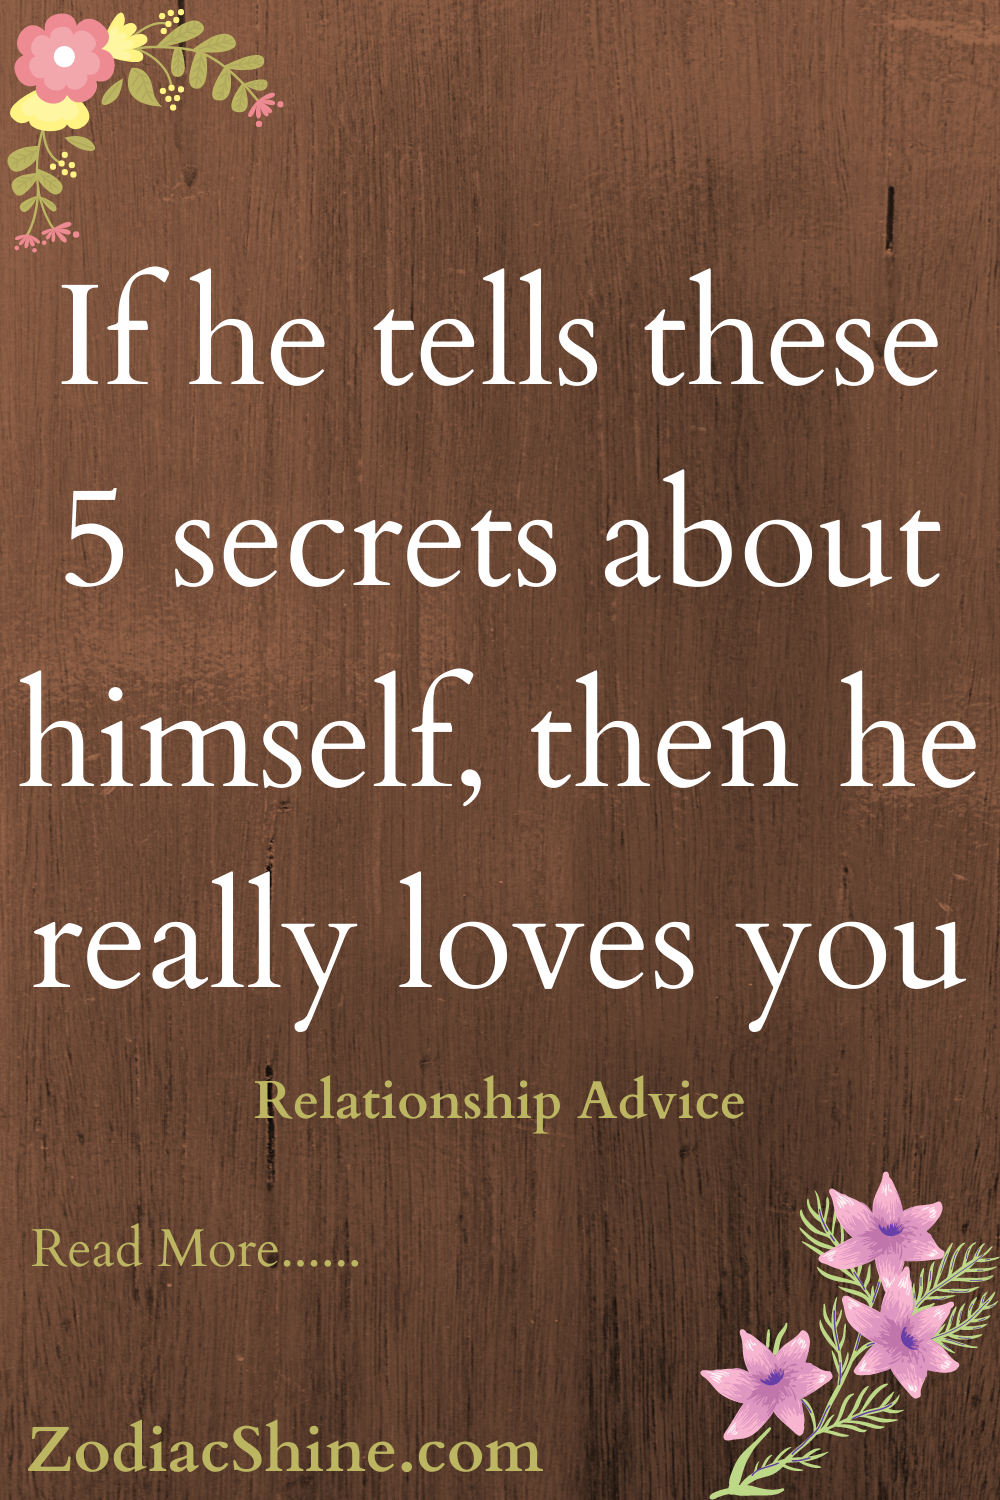 If he tells these 5 secrets about himself, then he really loves you